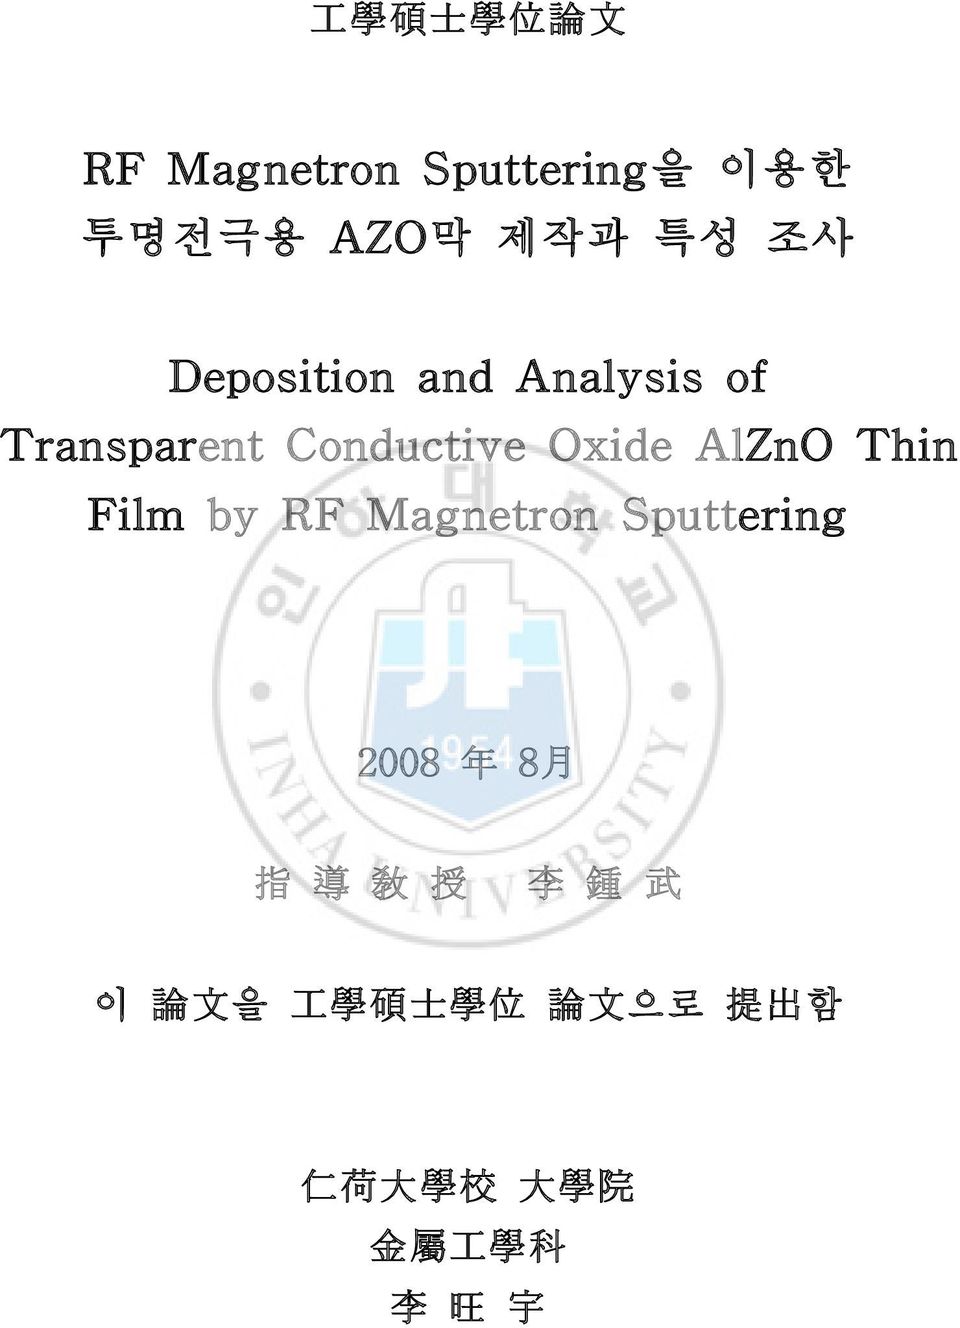 AlZnO Thin Film by RF Magnetron Sputtering 2008 年 8 月 指 導 敎 授 李